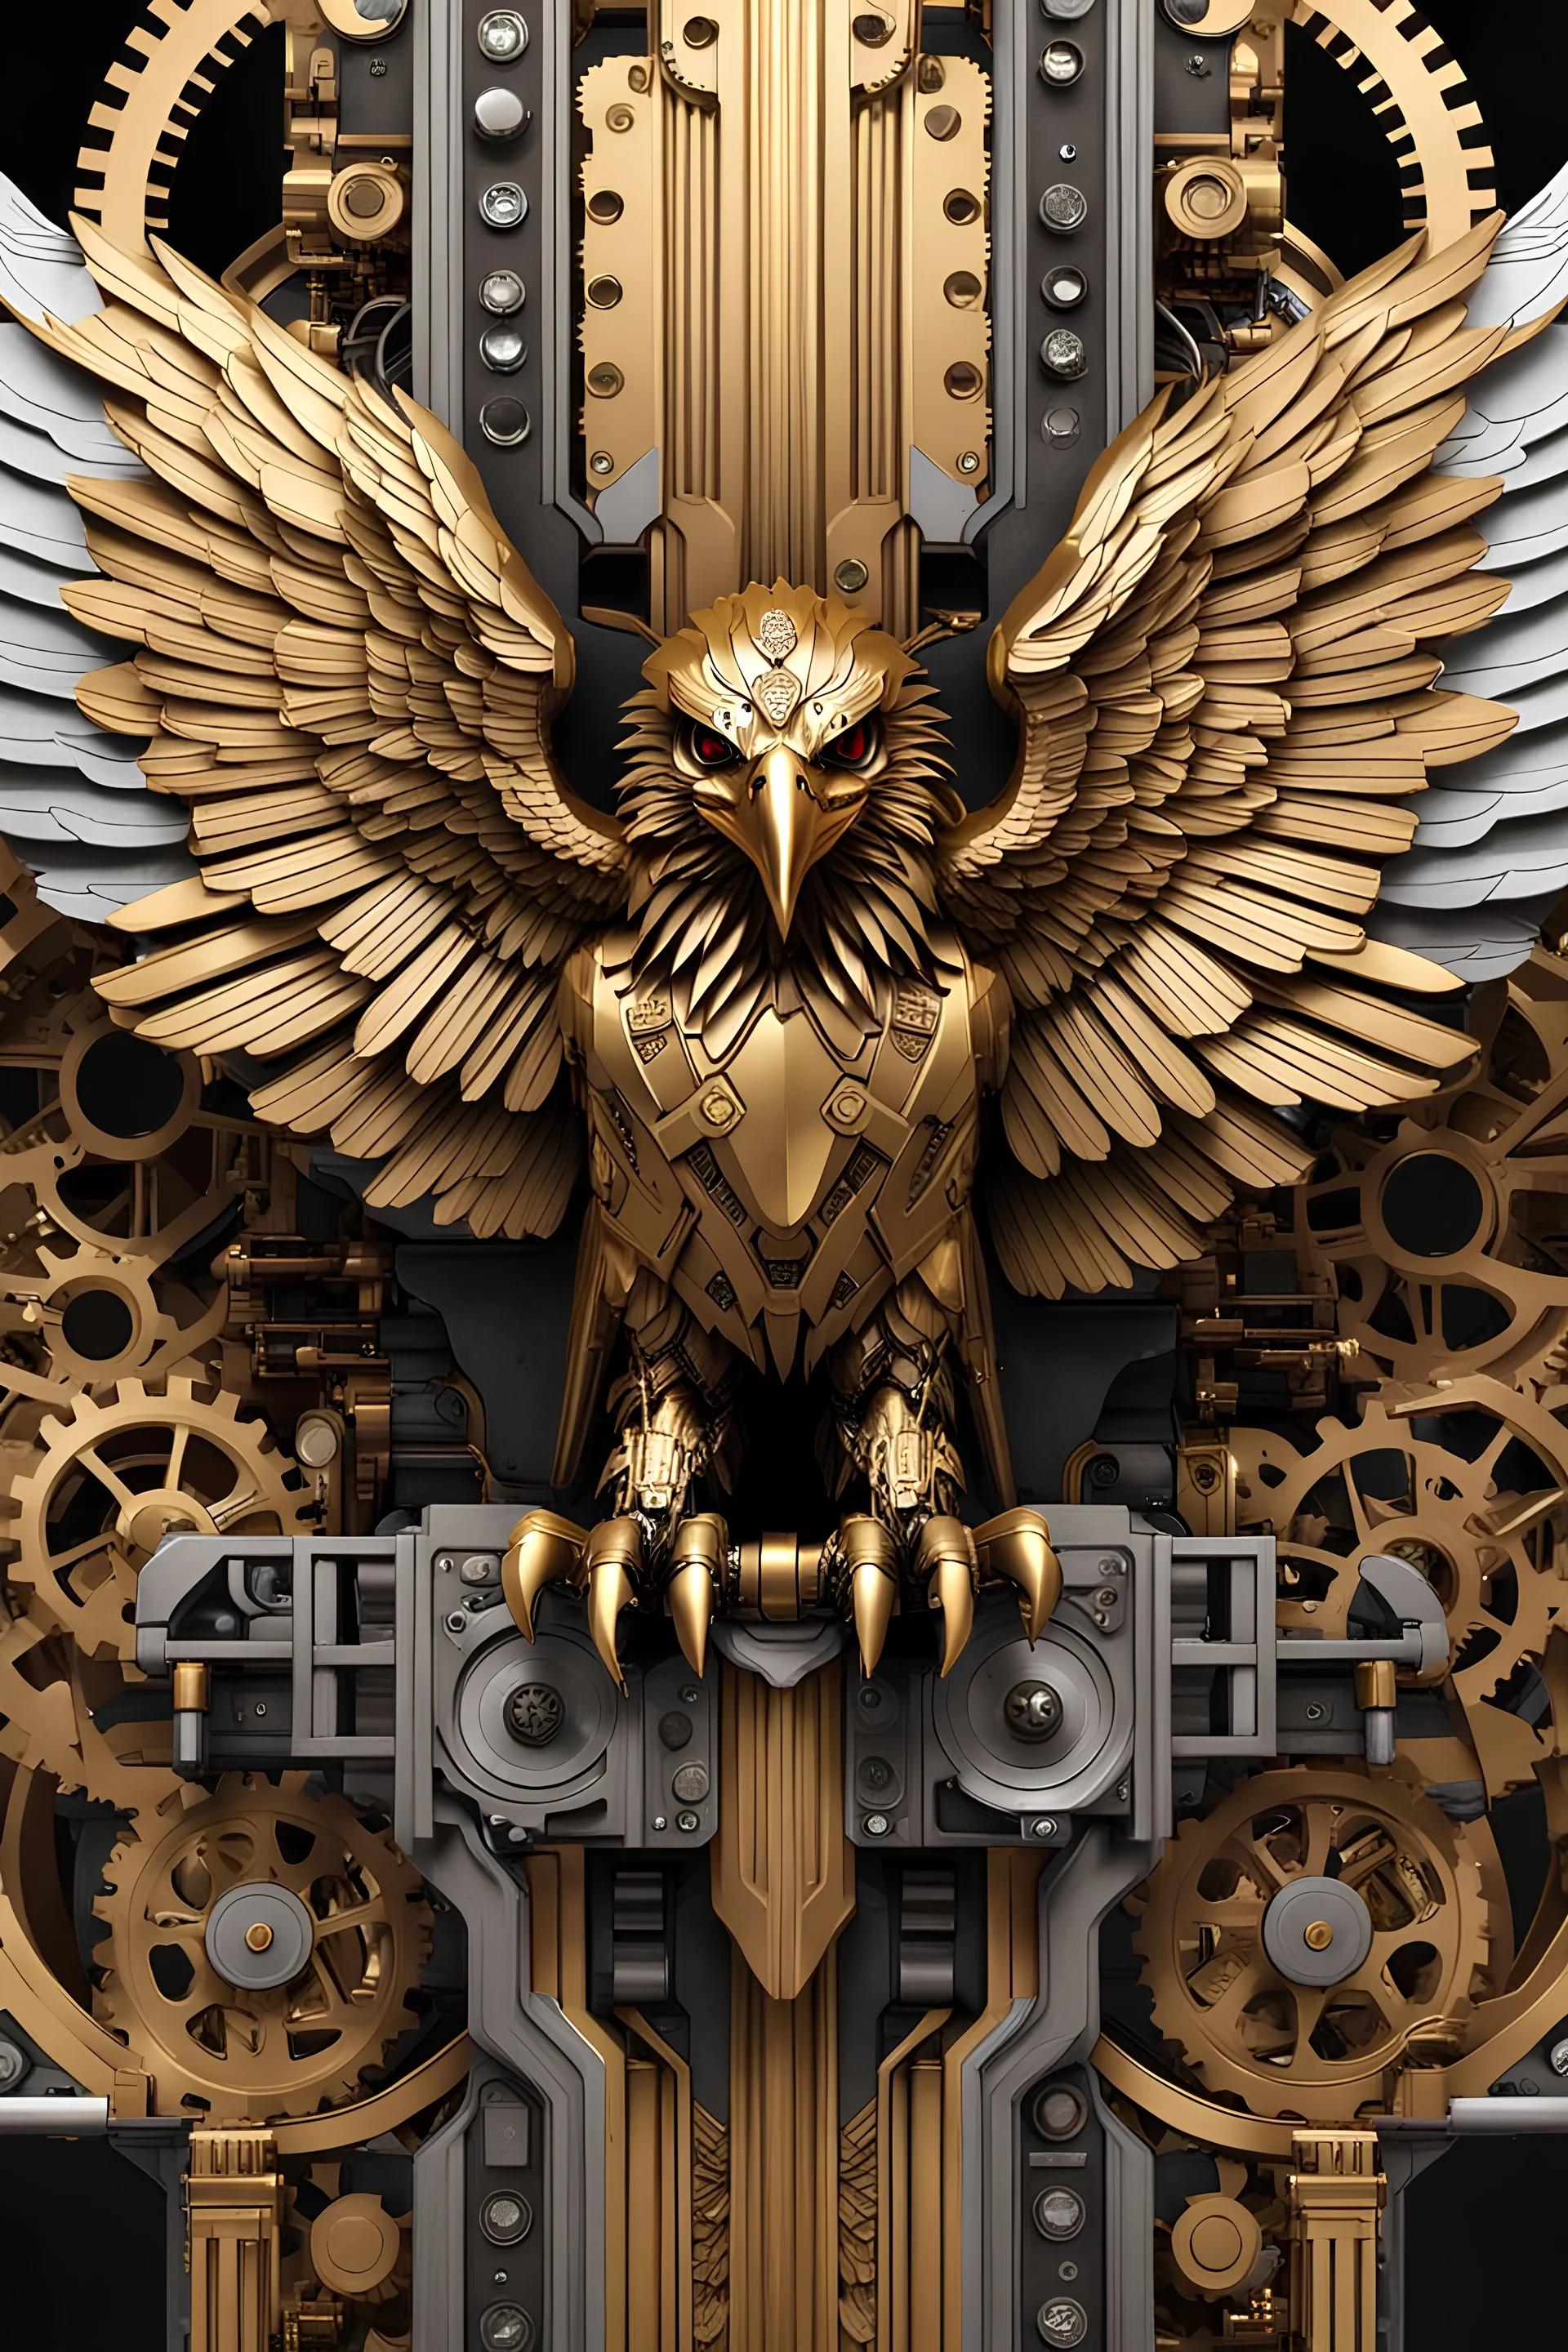 Facing front mechanical cyborg eagle straddle wings detailed, intricate, mechanical, gears cogs cables wires circuits, gold silver chrome copper